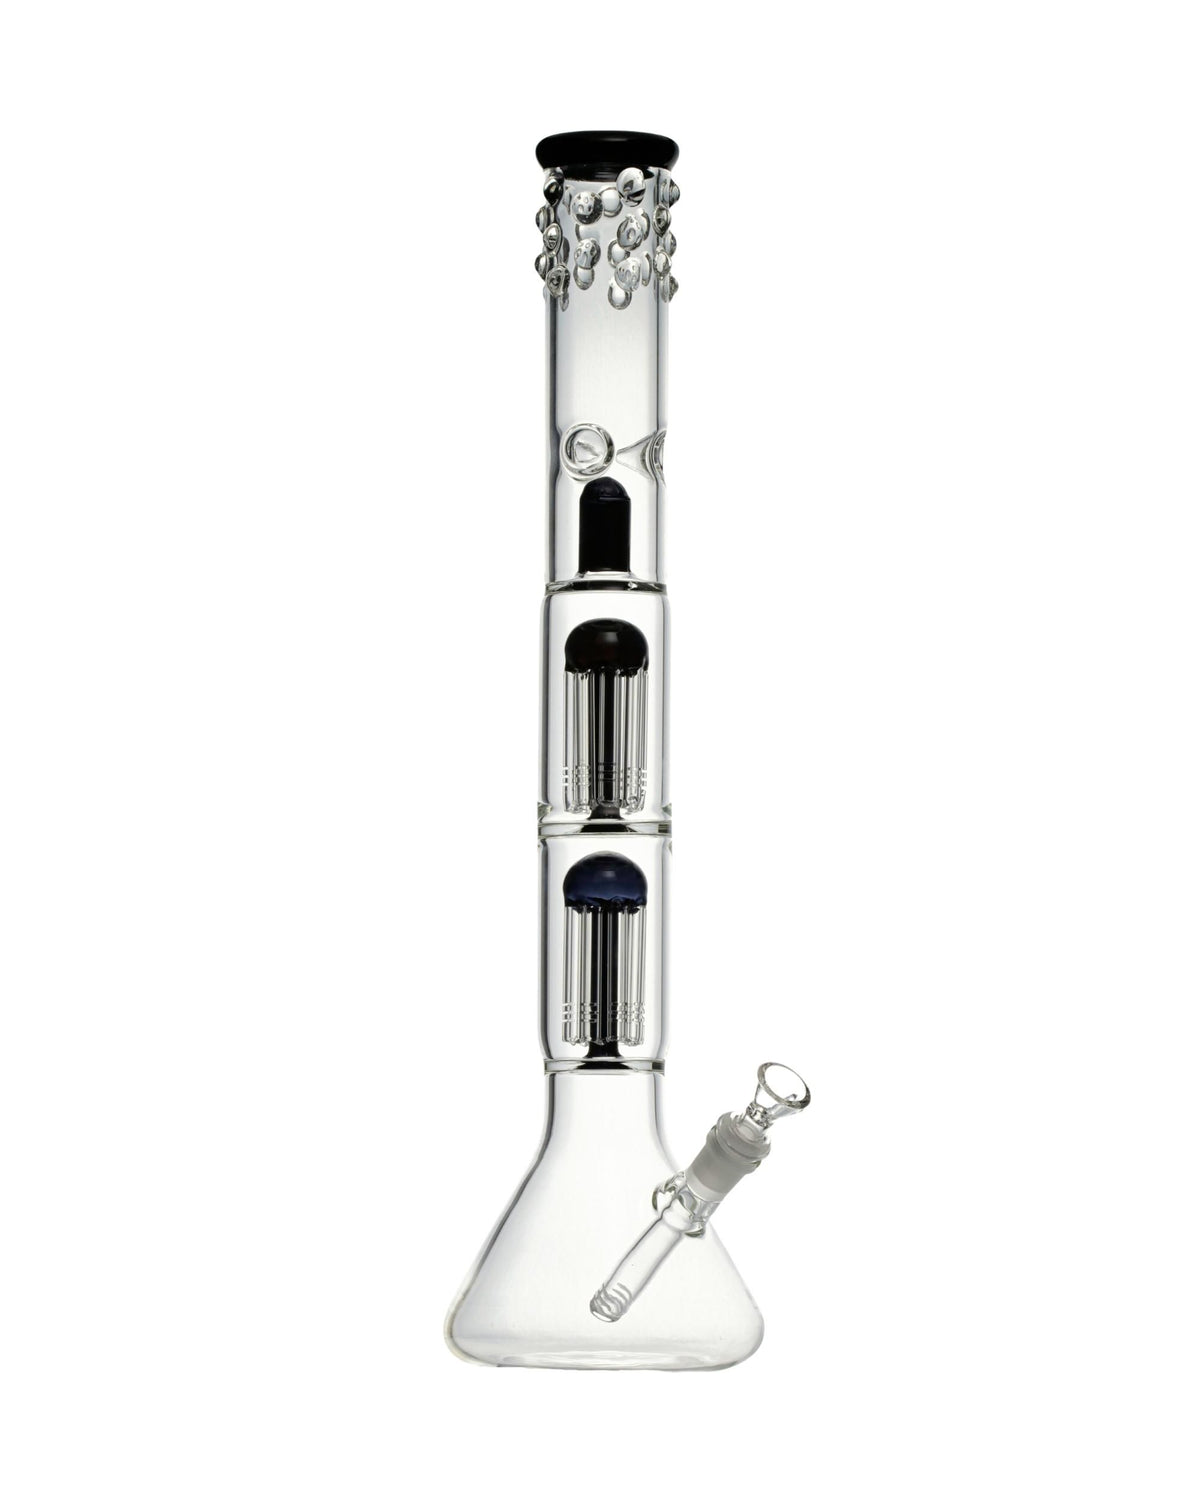 18” Double Tree Perc Spotted Bong WorldofBongs